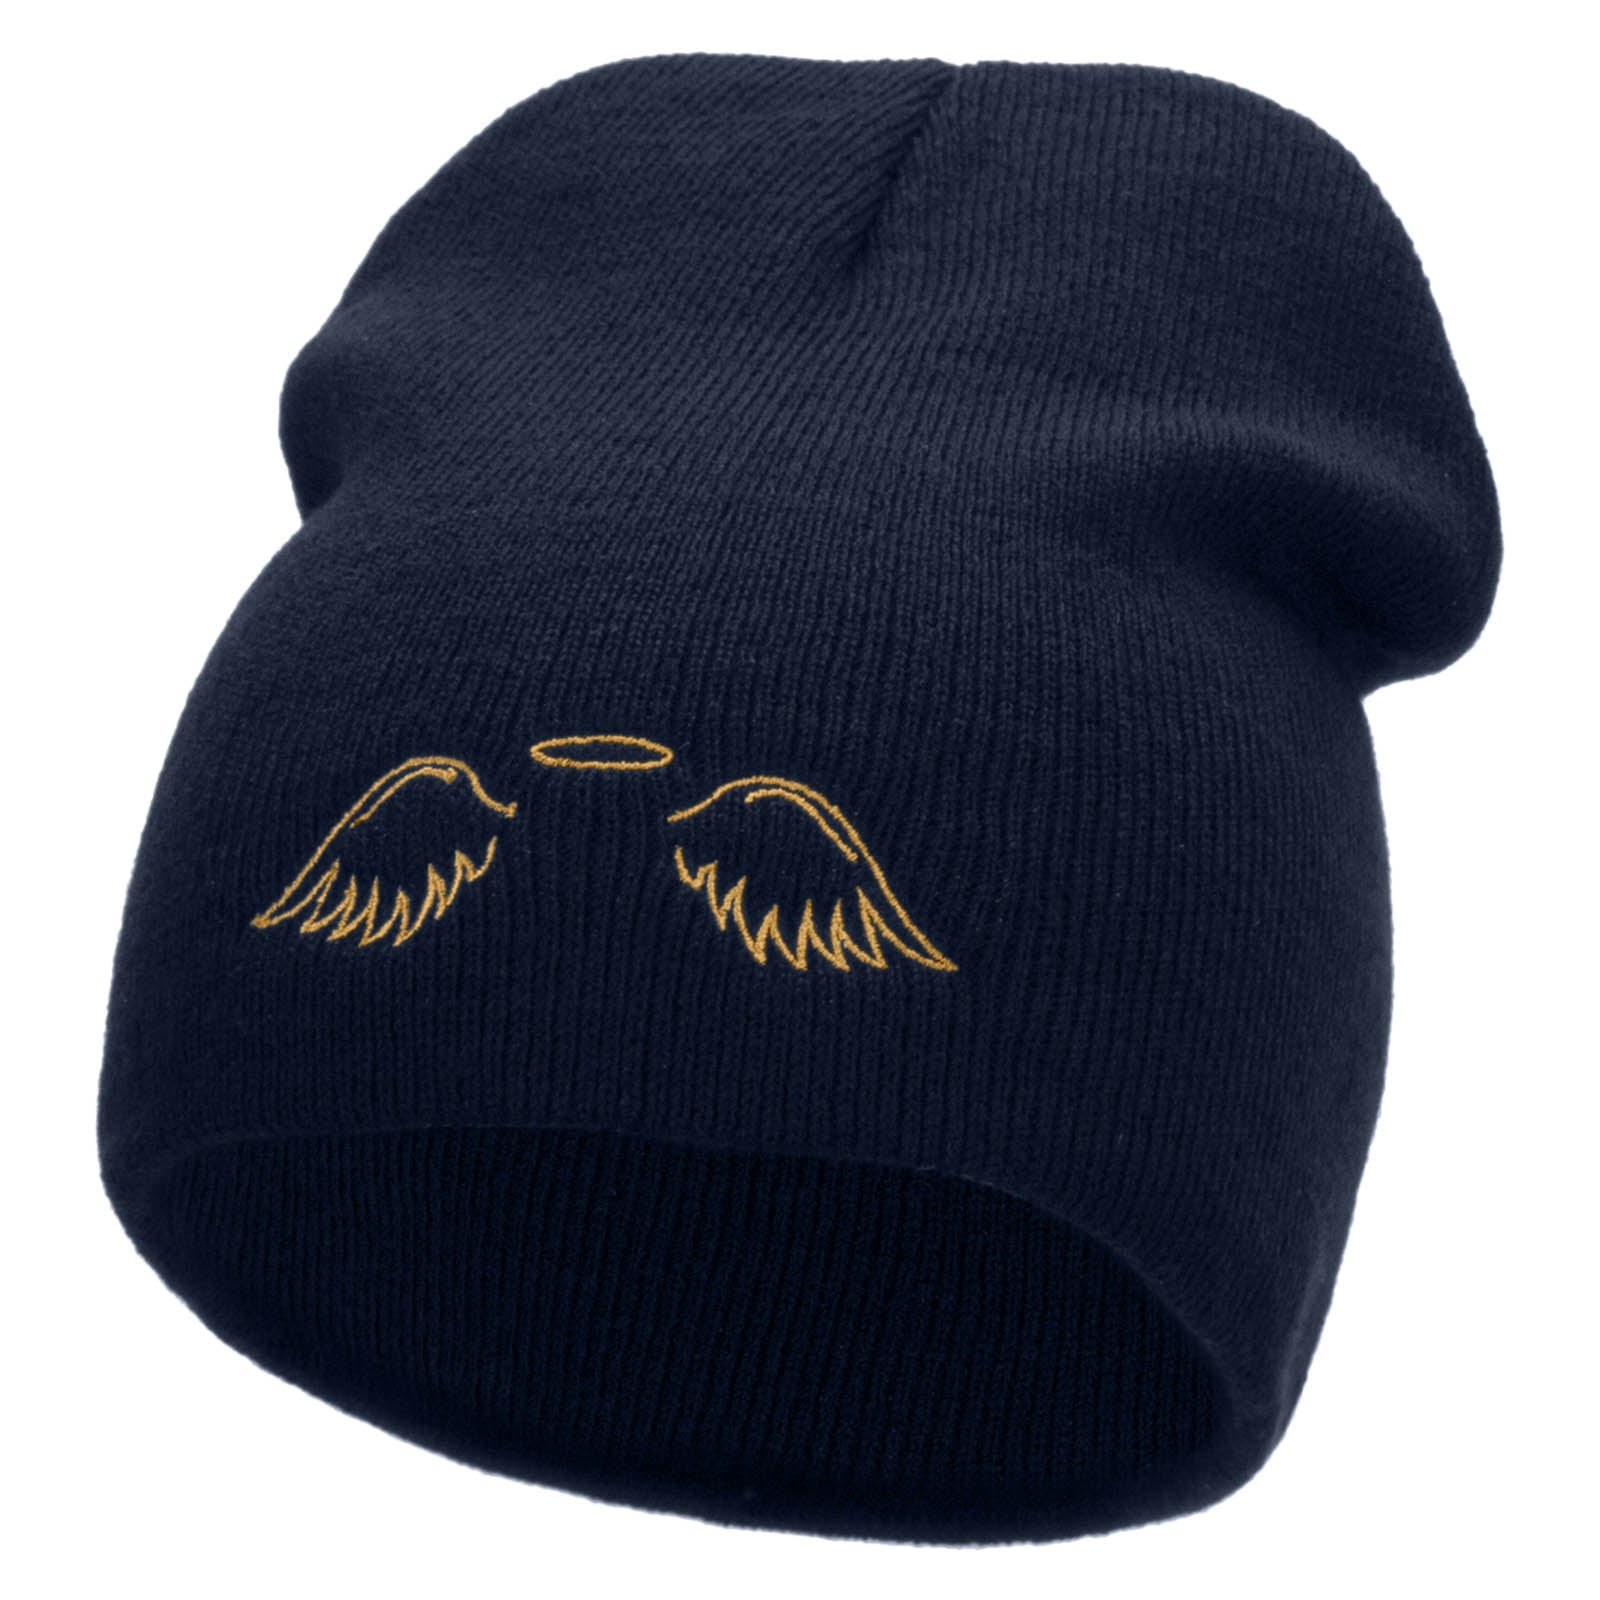 Angel Wings Embroidered 8 inch Acrylic Short Blank Beanie - Navy OSFM